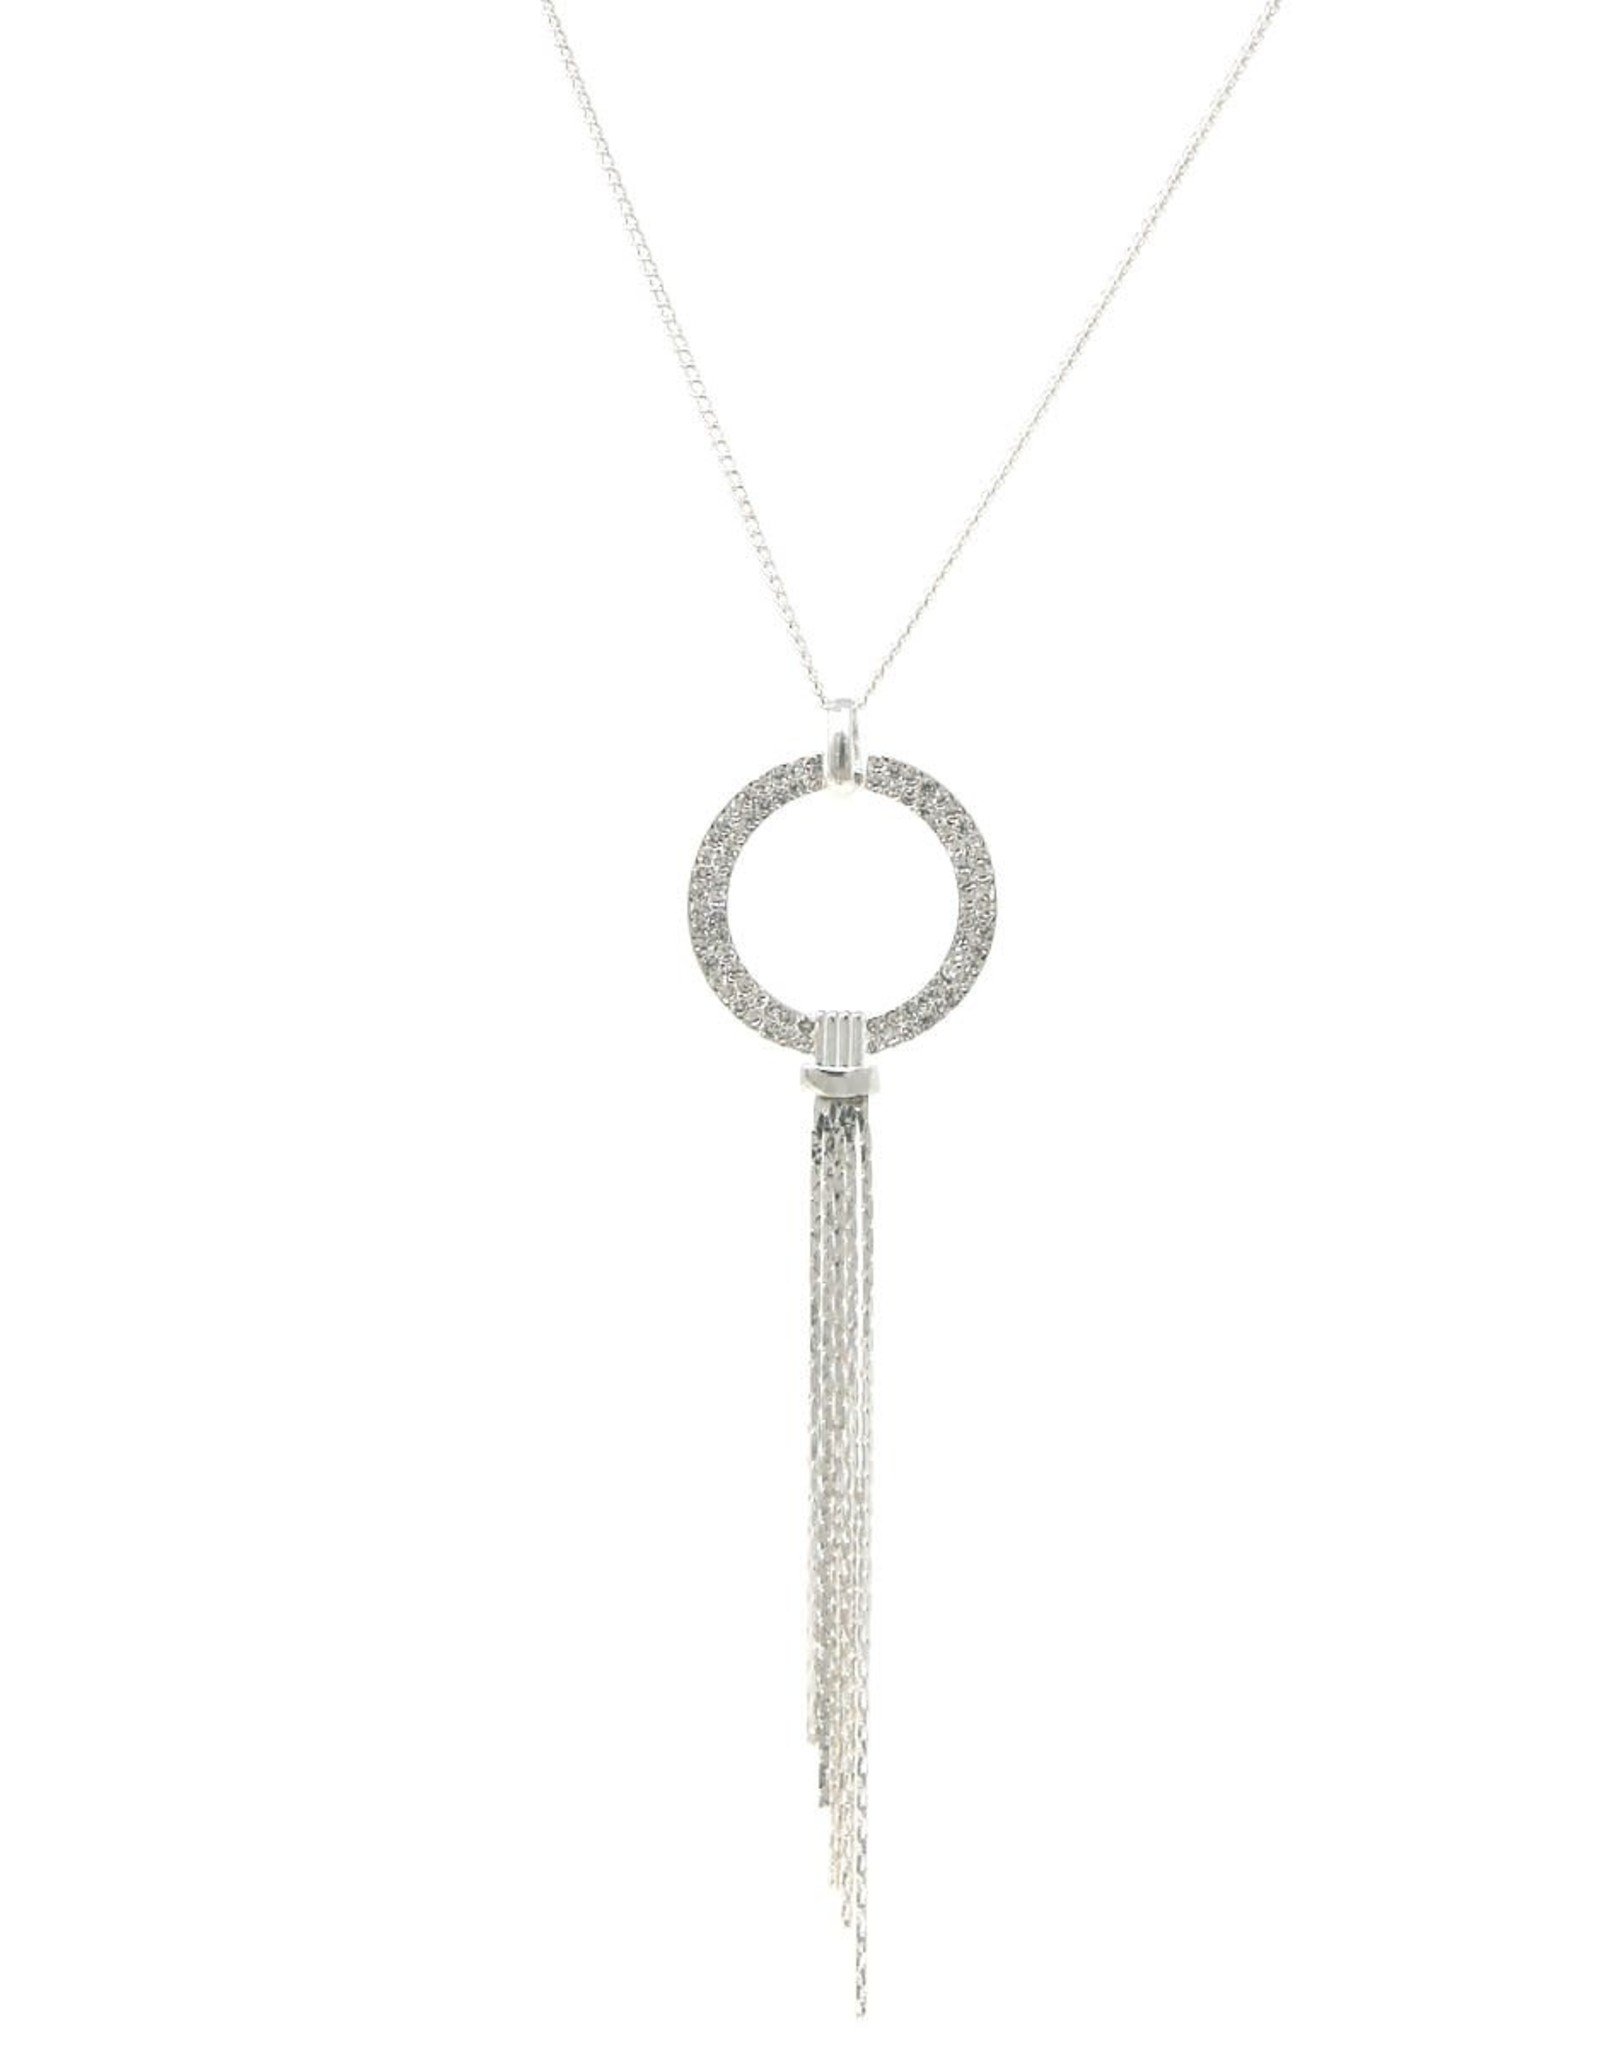 Rhinestone Pave Hoop Chain Fringe Pendant Long Necklace - Silver